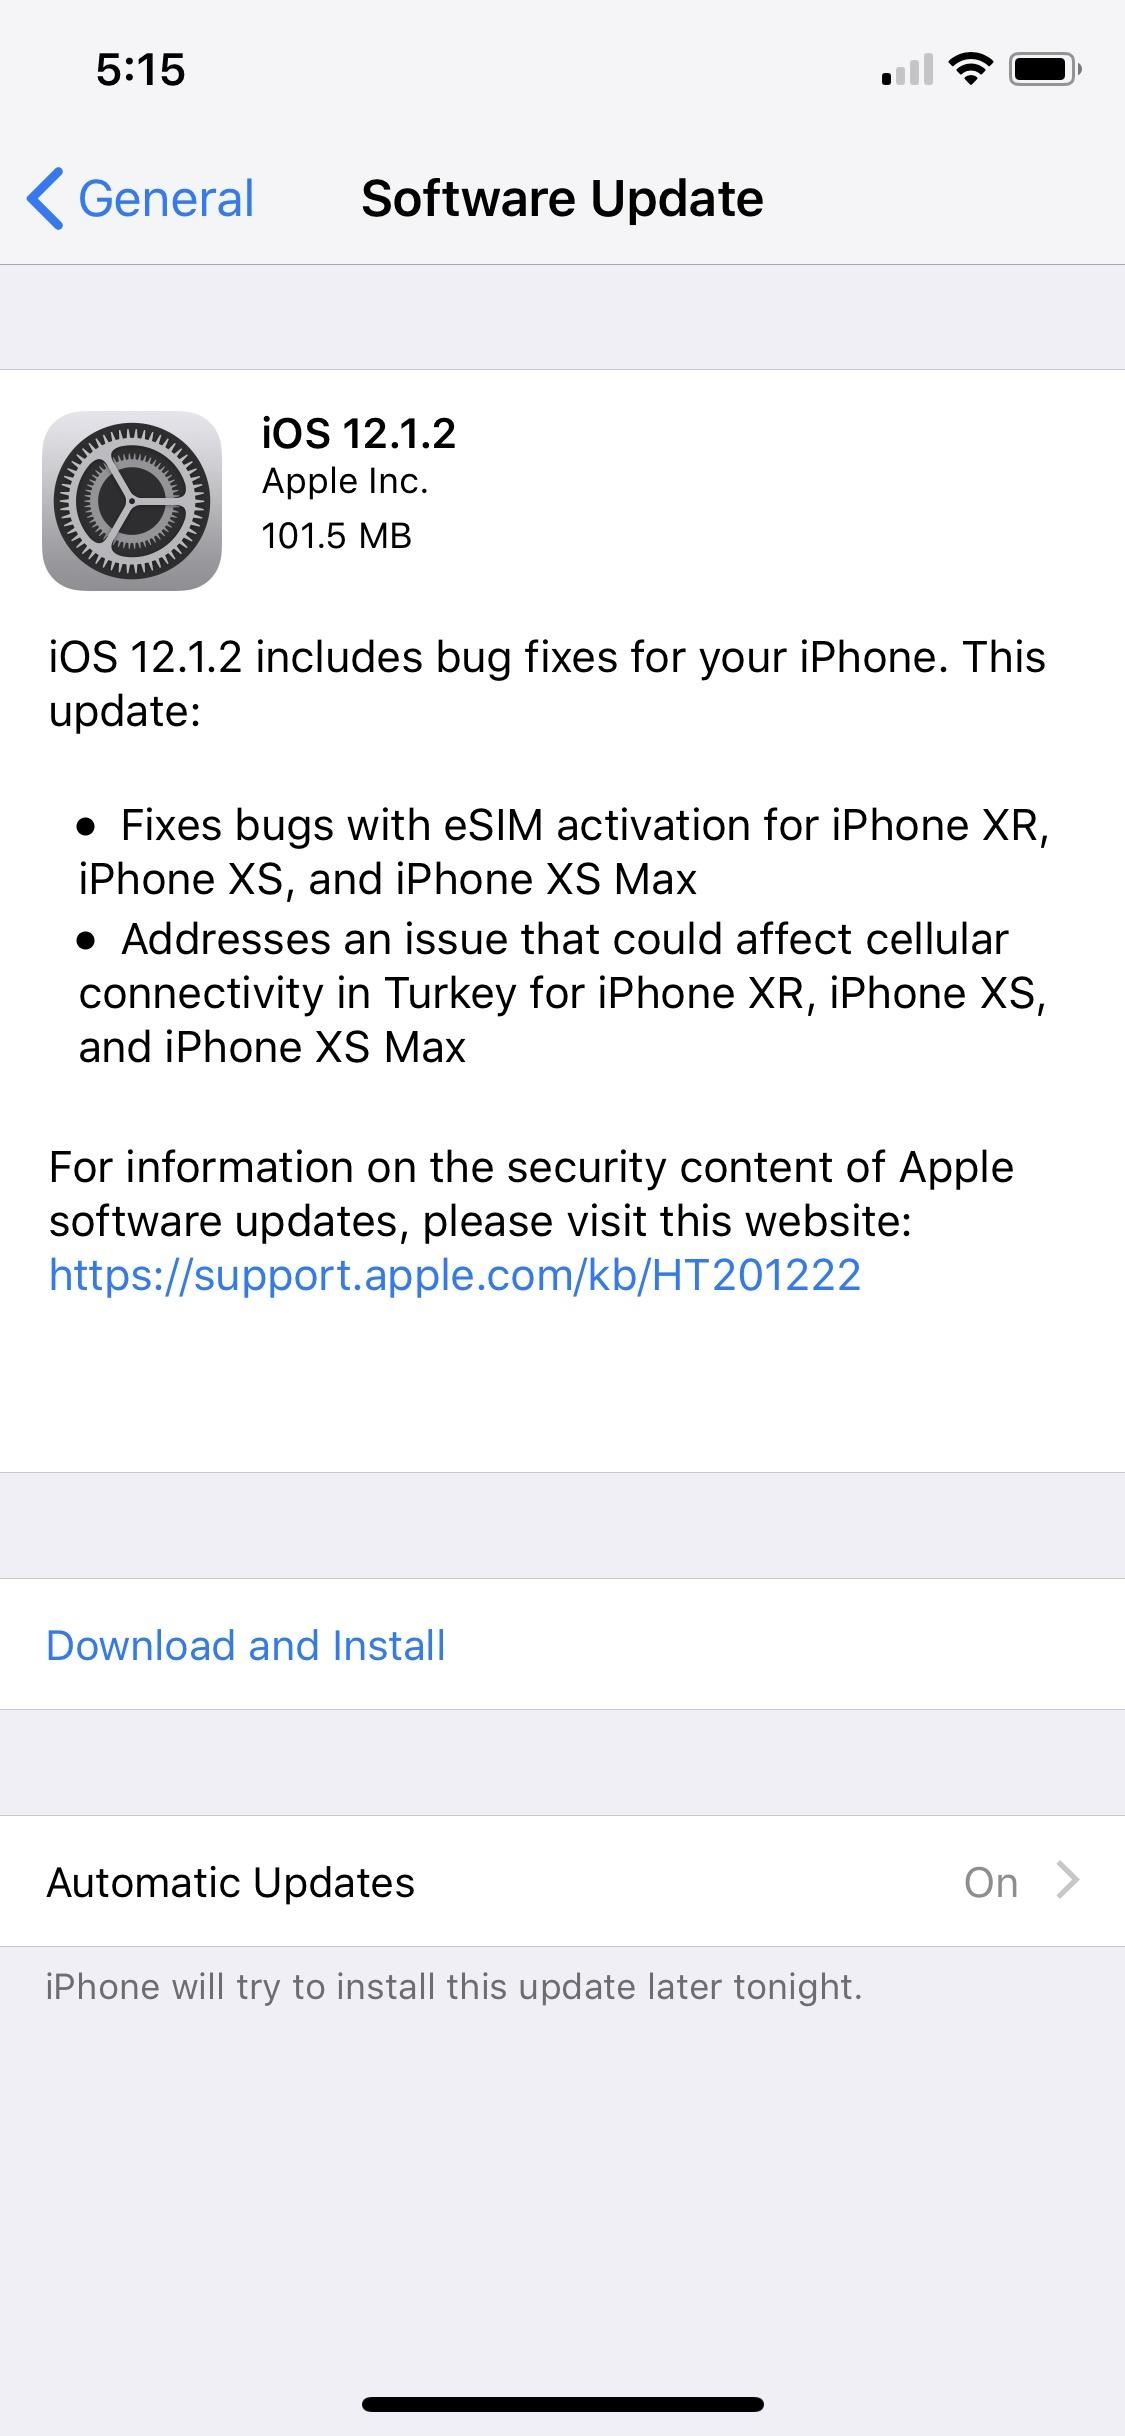 Apple Just Released iOS 12.1.2 for iPhones with Fix for eSIM Activation Issues